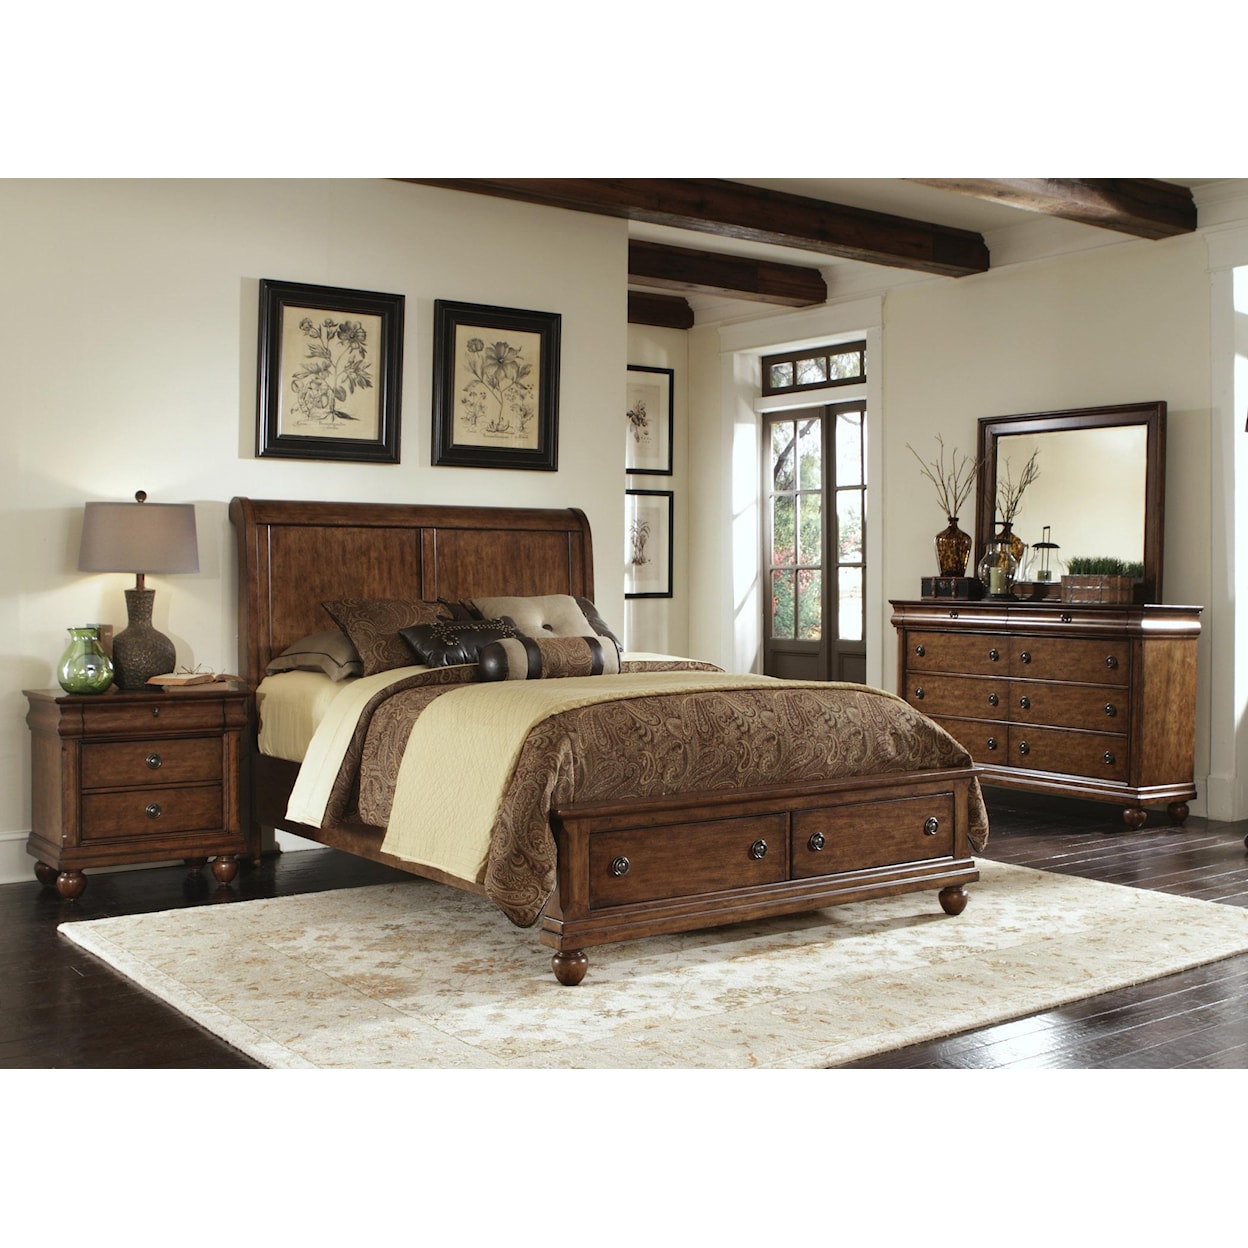 Liberty Furniture Rustic Traditions Queen Storage Bed Set